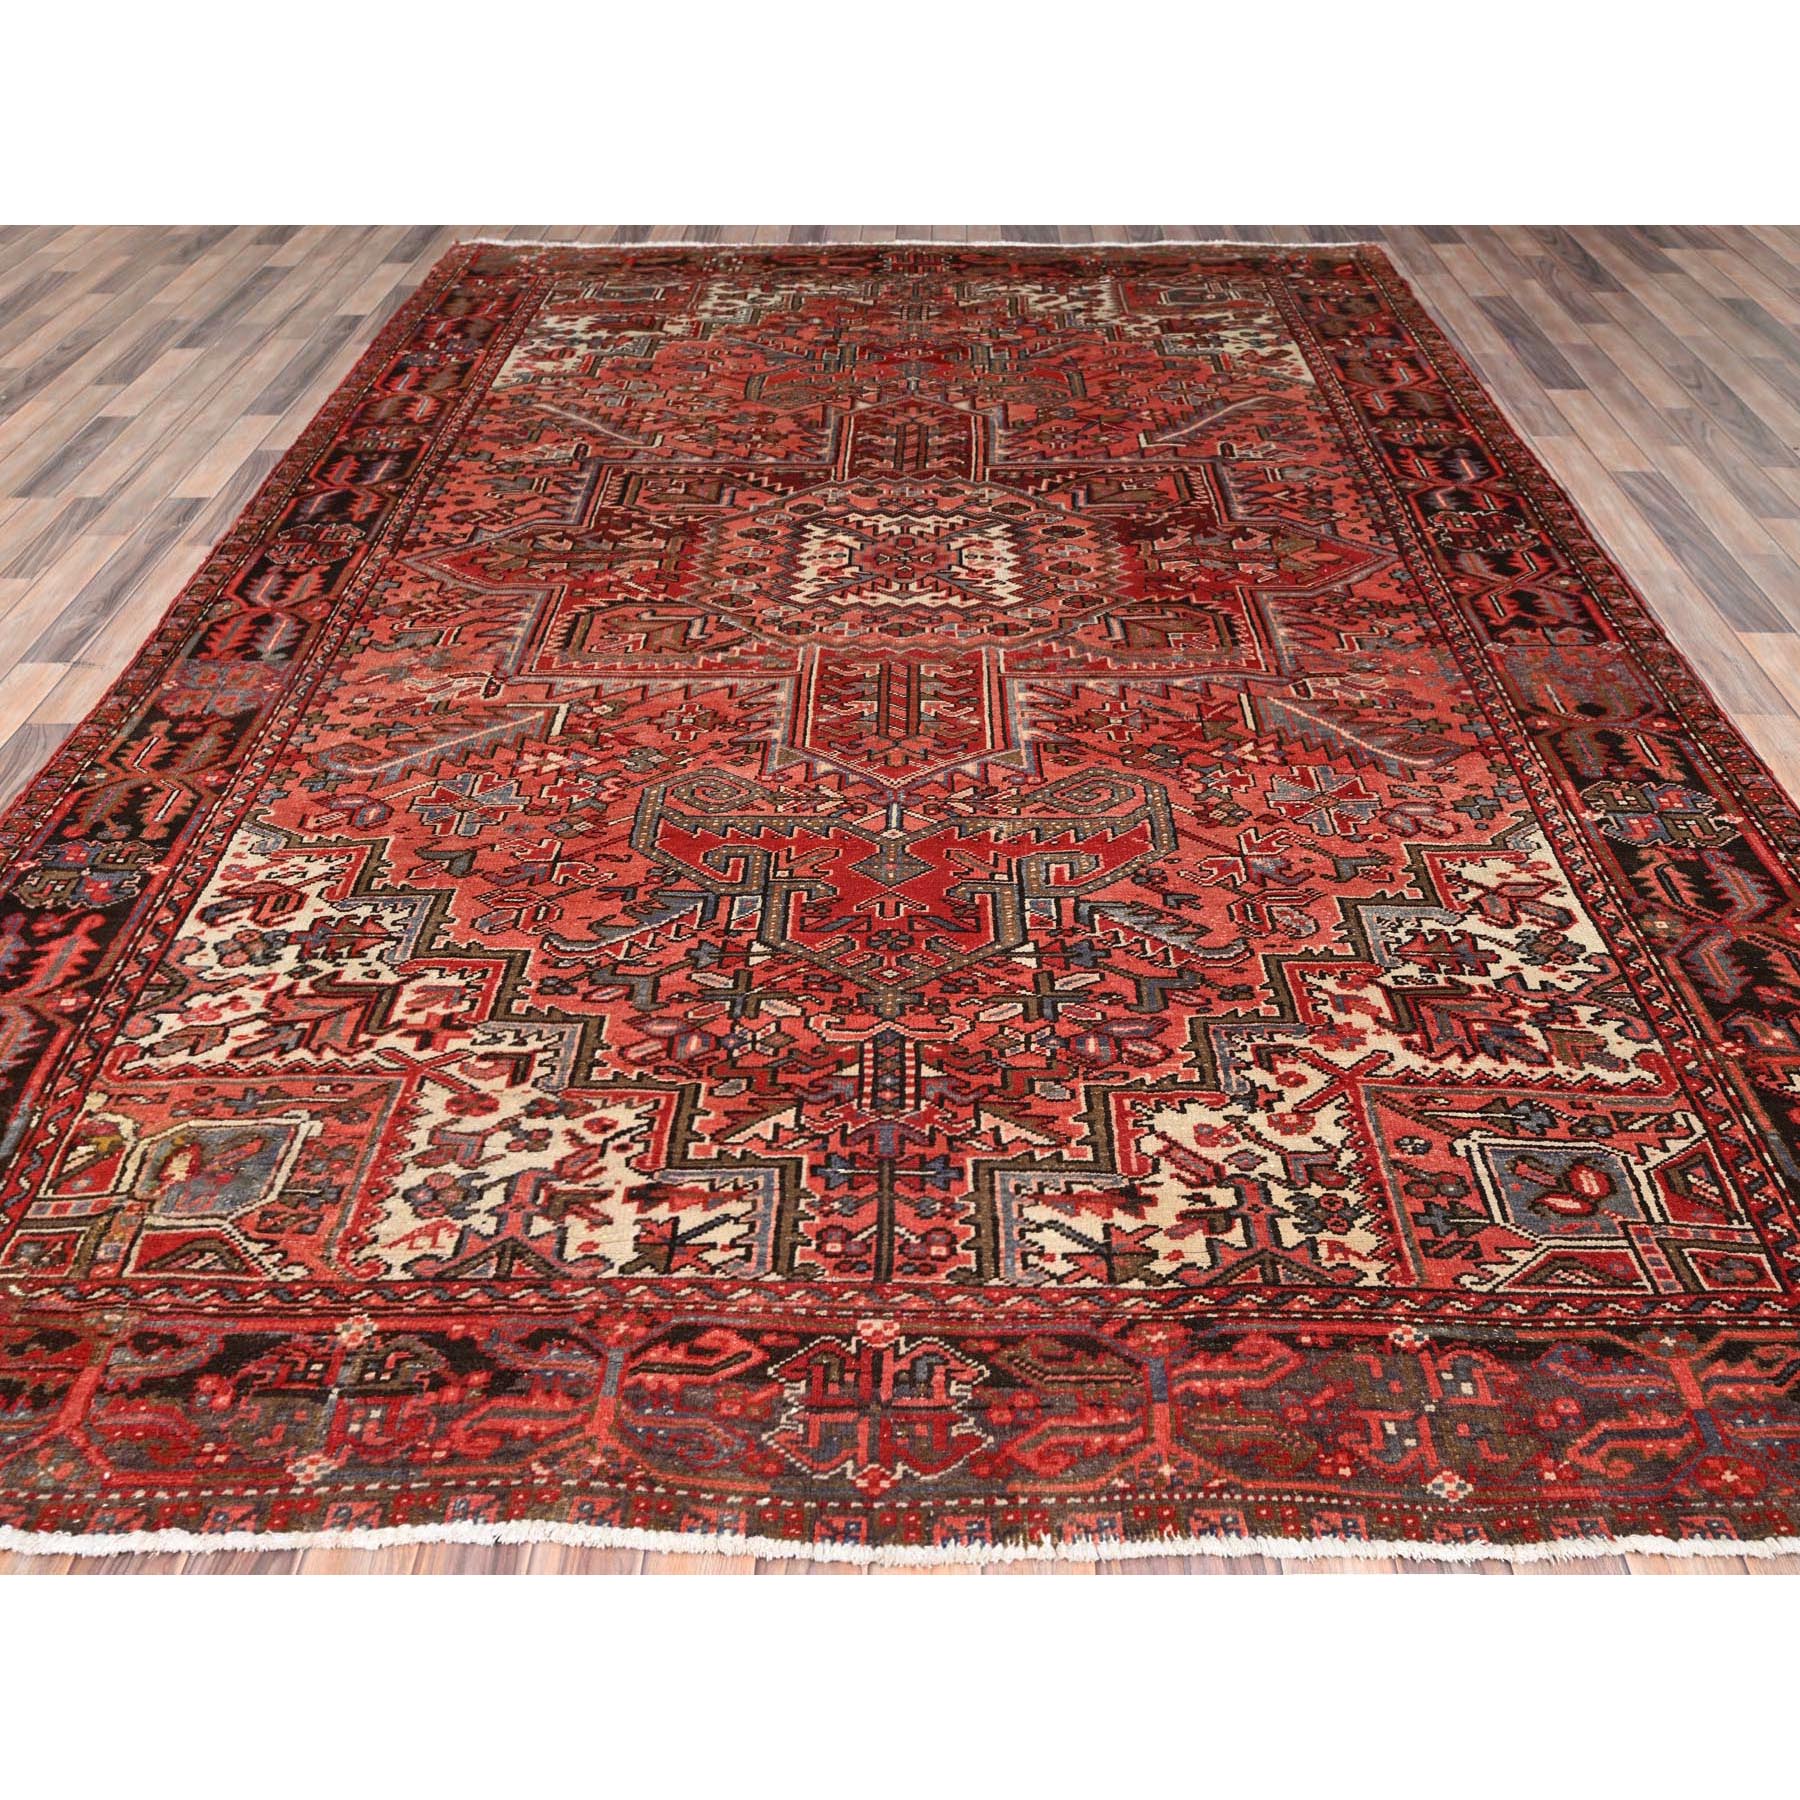 8'2"x11'6" Salmon Red, Rustic Look, Worn Wool, Hand Woven, Semi Antique Persian Heriz with Tribal Ambience, Good Condition, Oriental Rug 